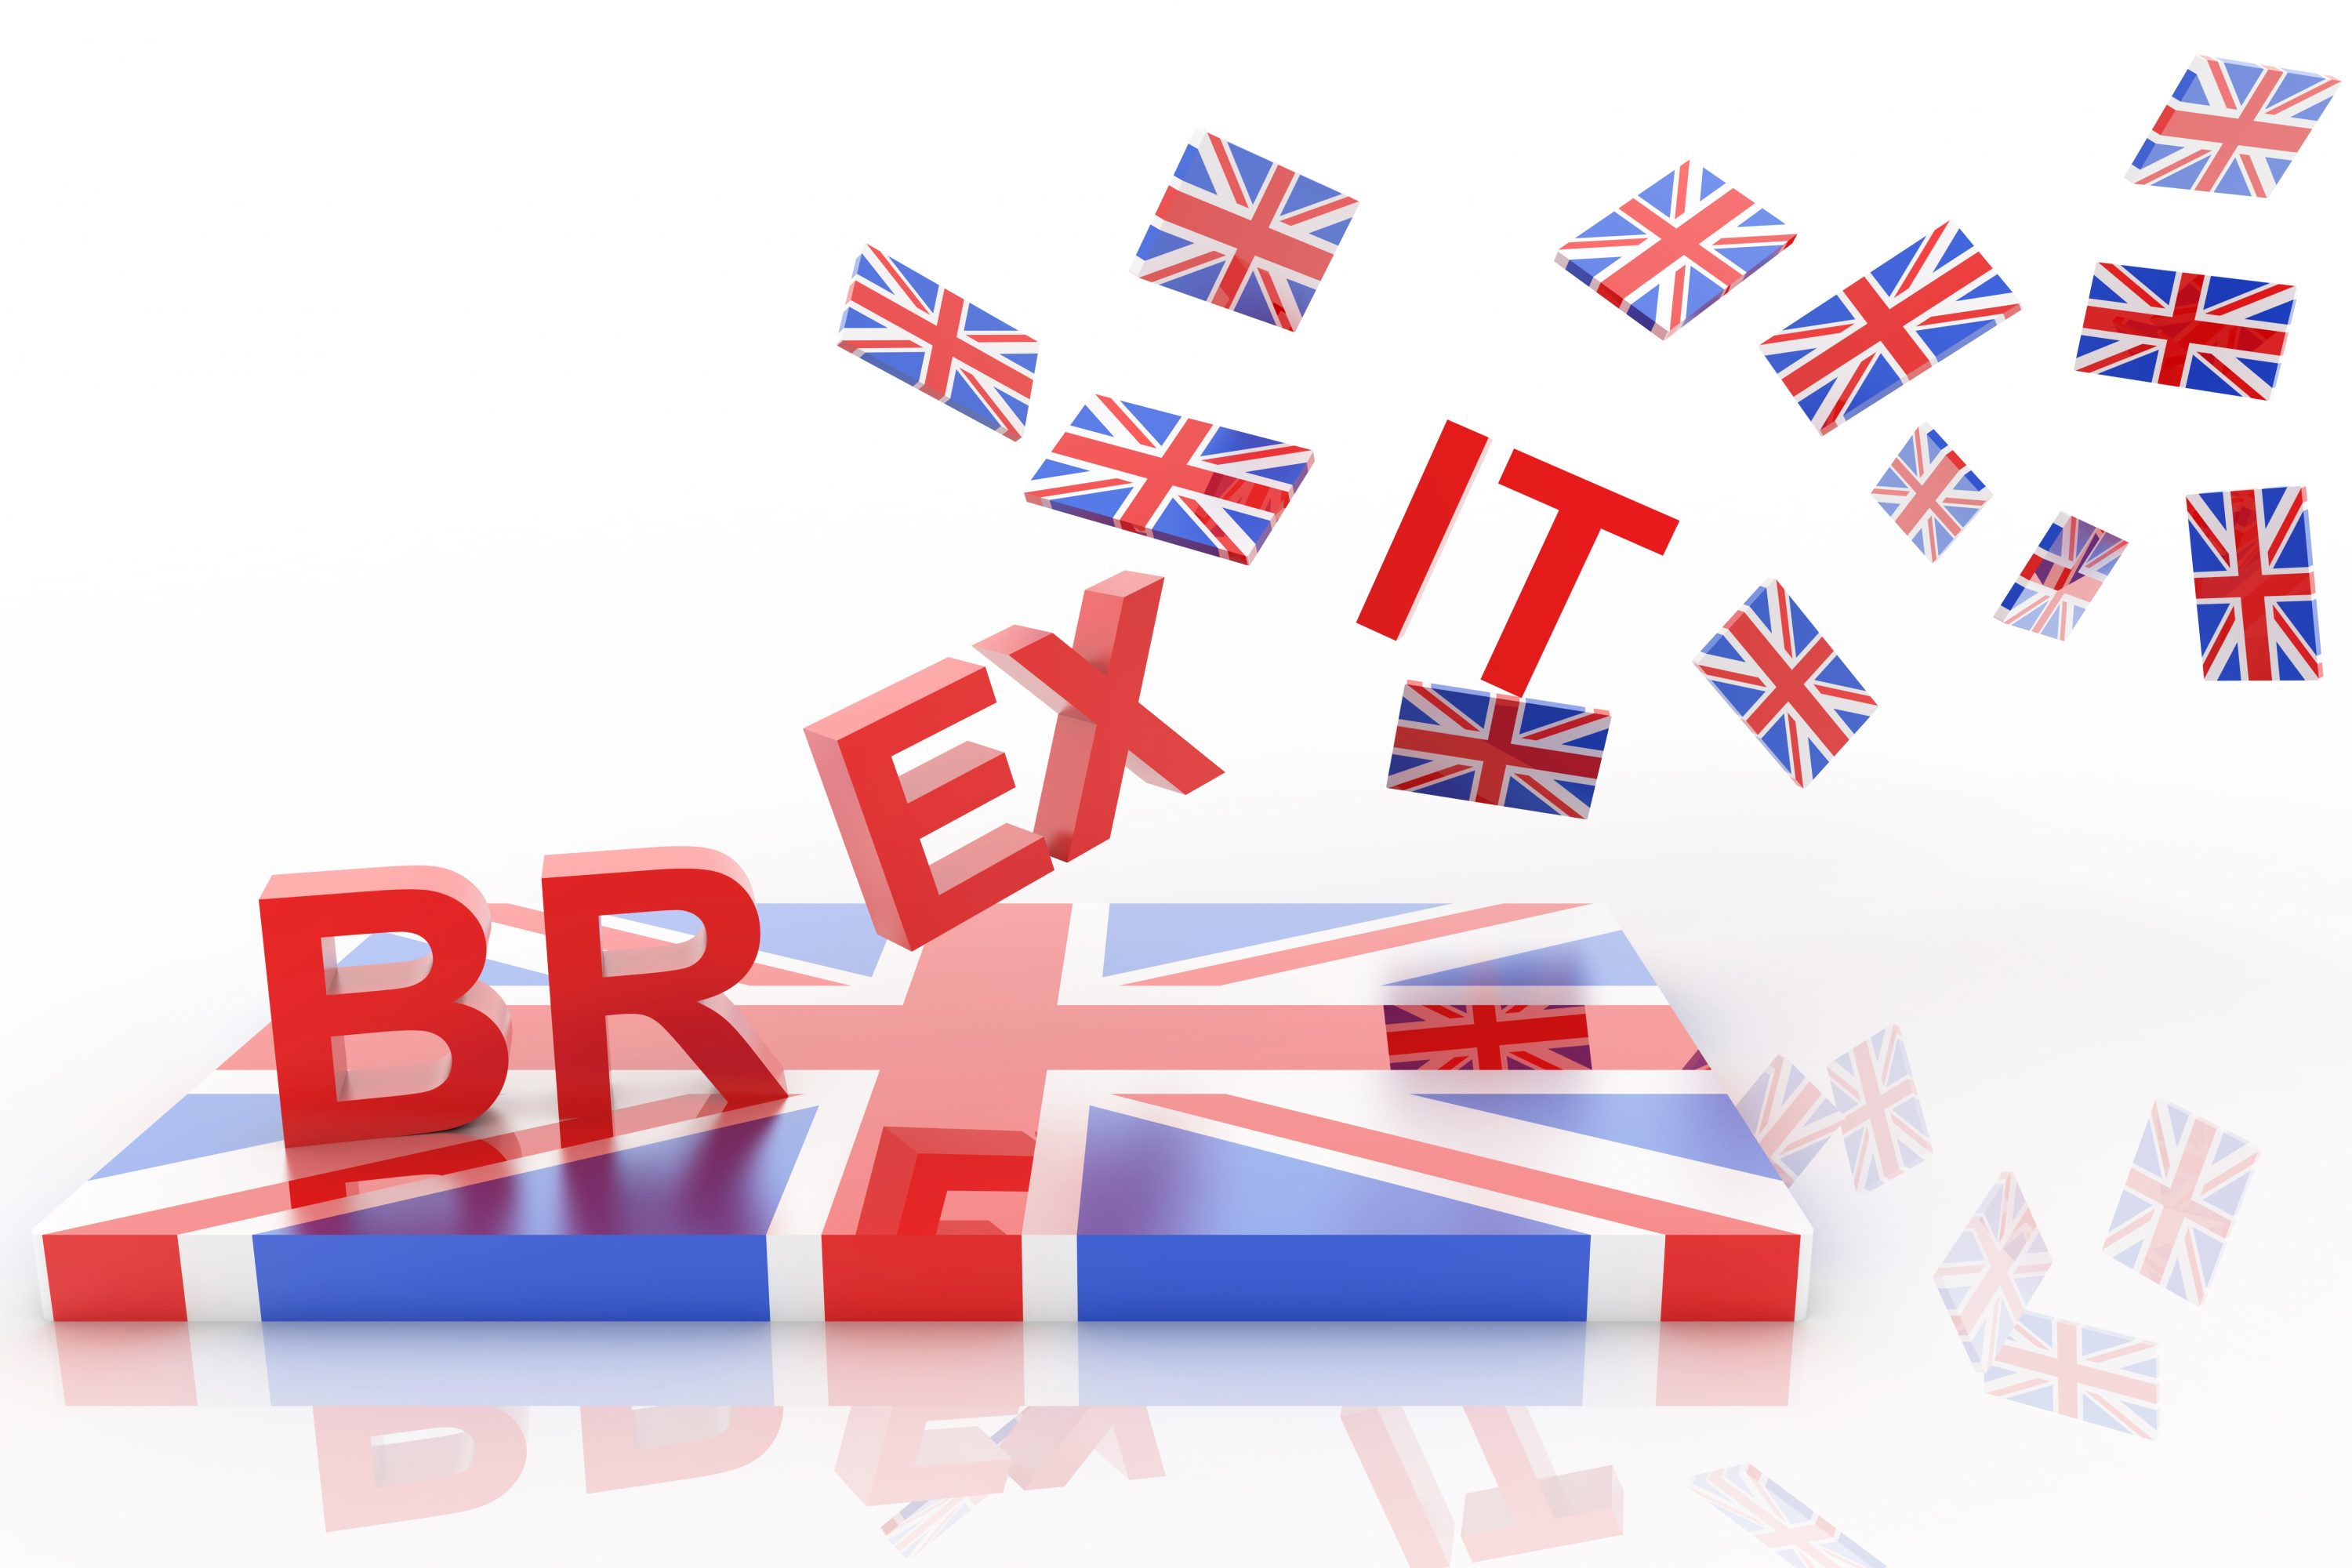 Conceptual illustration depicting Great Britain and its relationship with the European Union. (iStock Image)